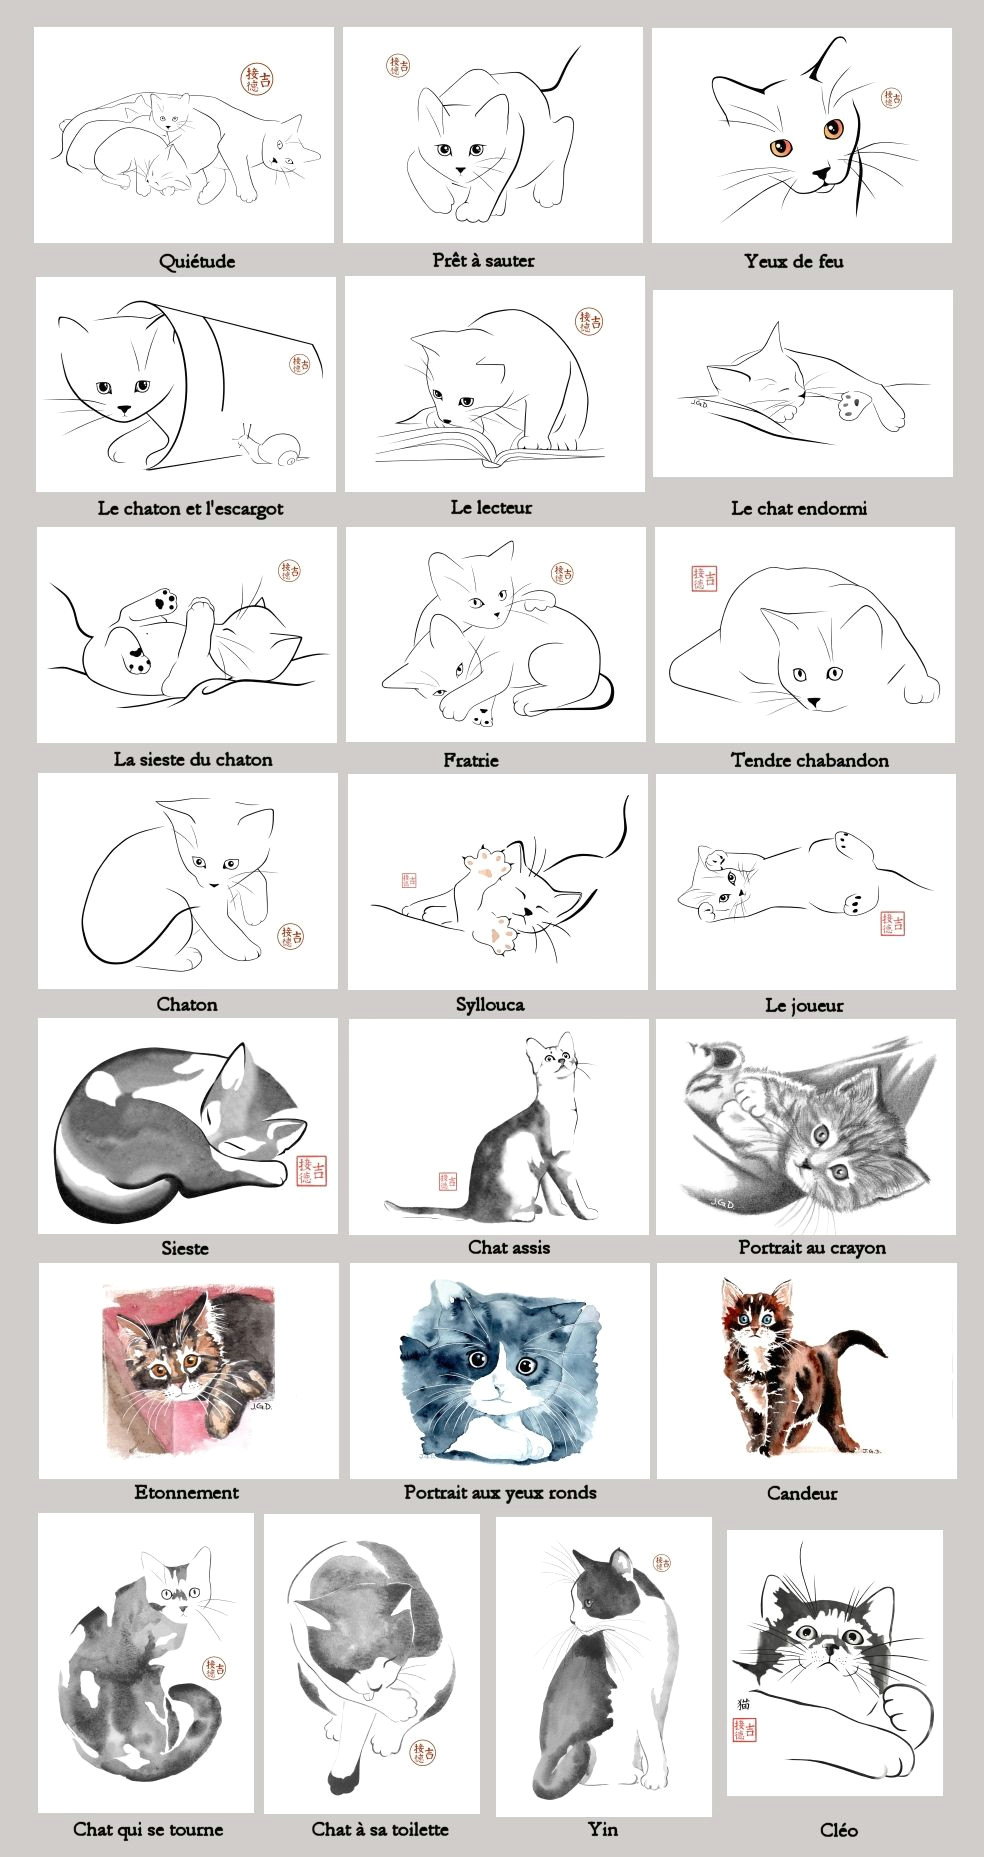 L Drawing Pictures Oeuvres Chats De L Artiste Ginoux Duvivier Print Inspiration